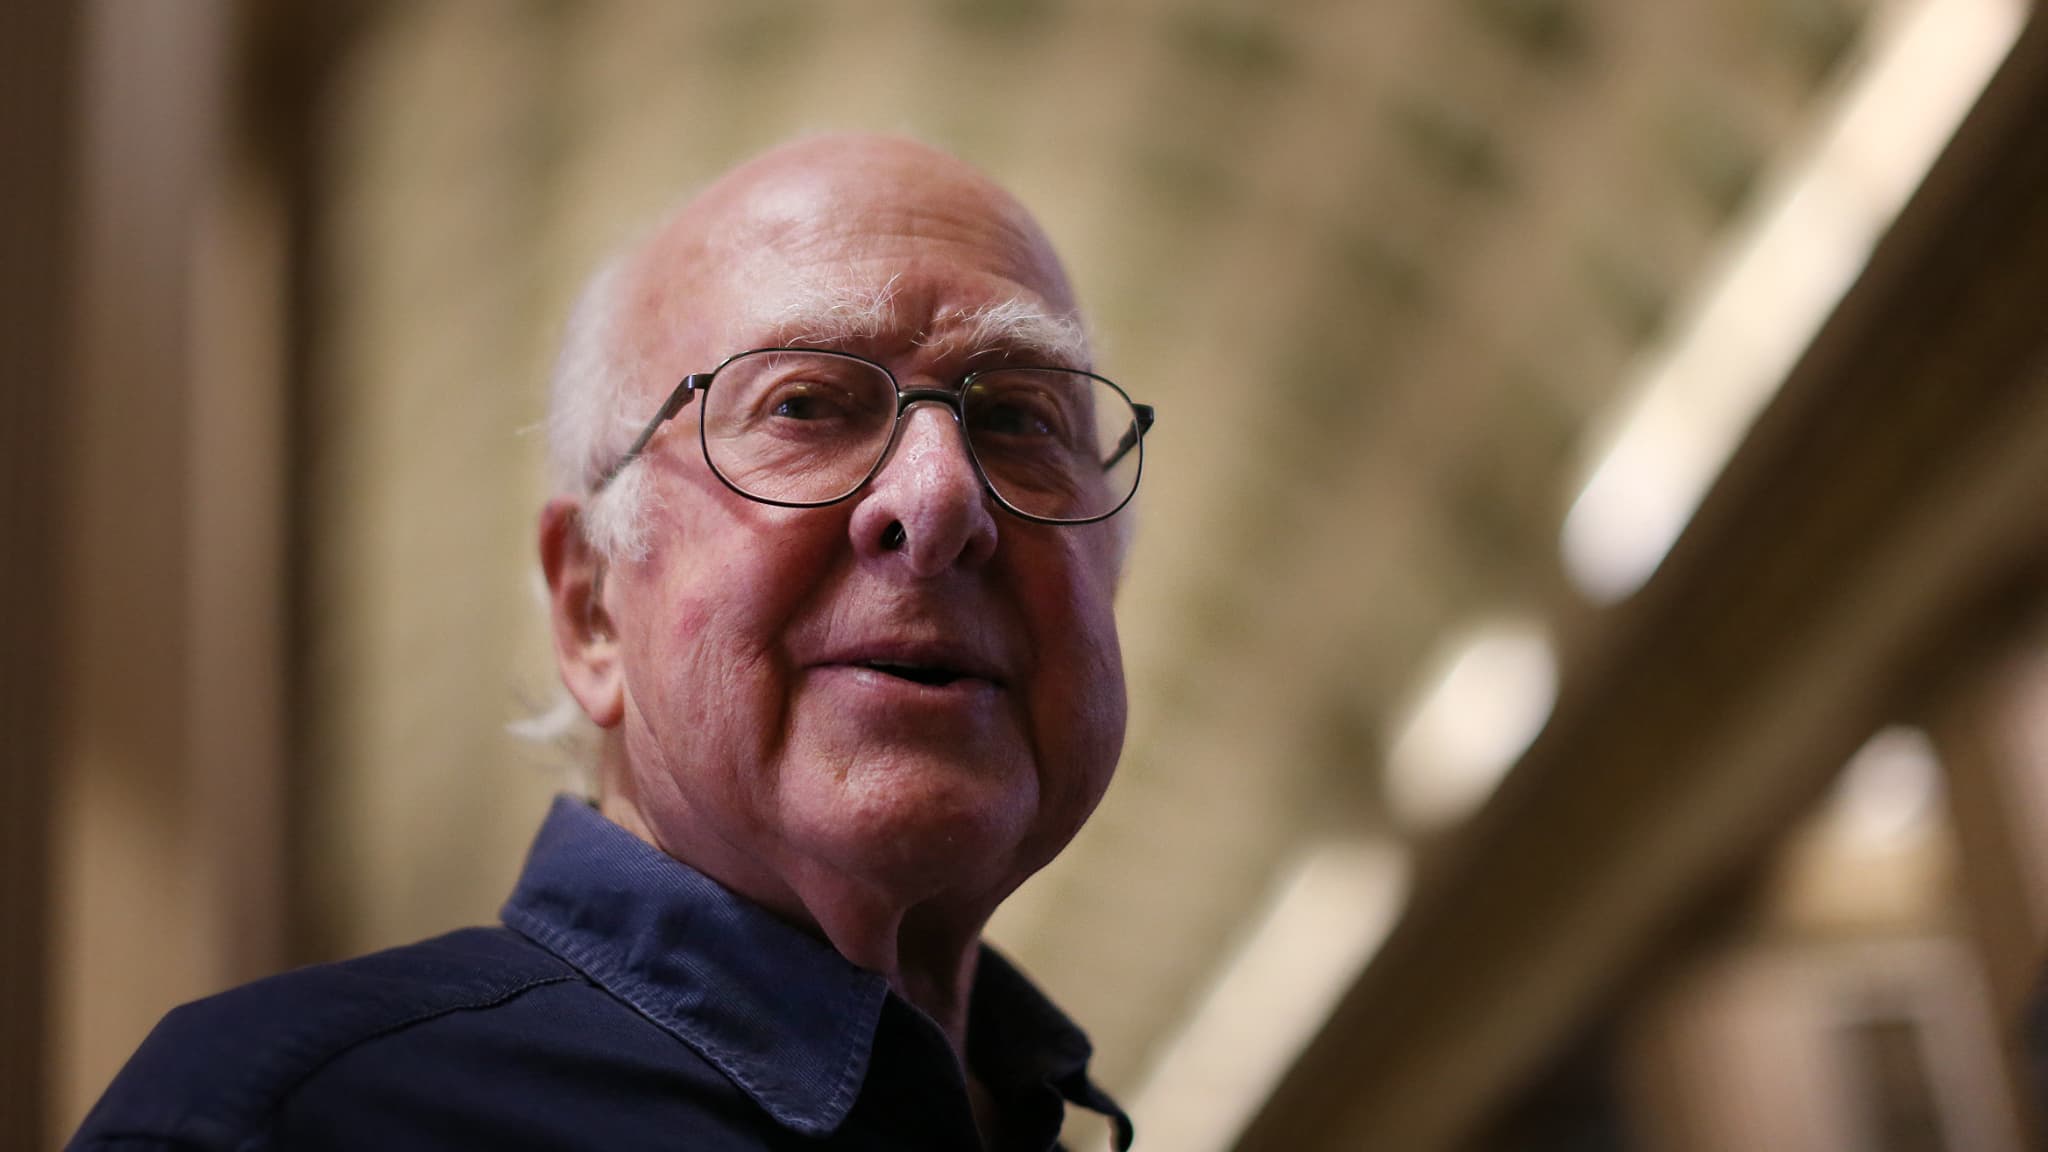 Peter Higgs: Nobel laureate in physics and father of the "Higgs boson" dies aged 94